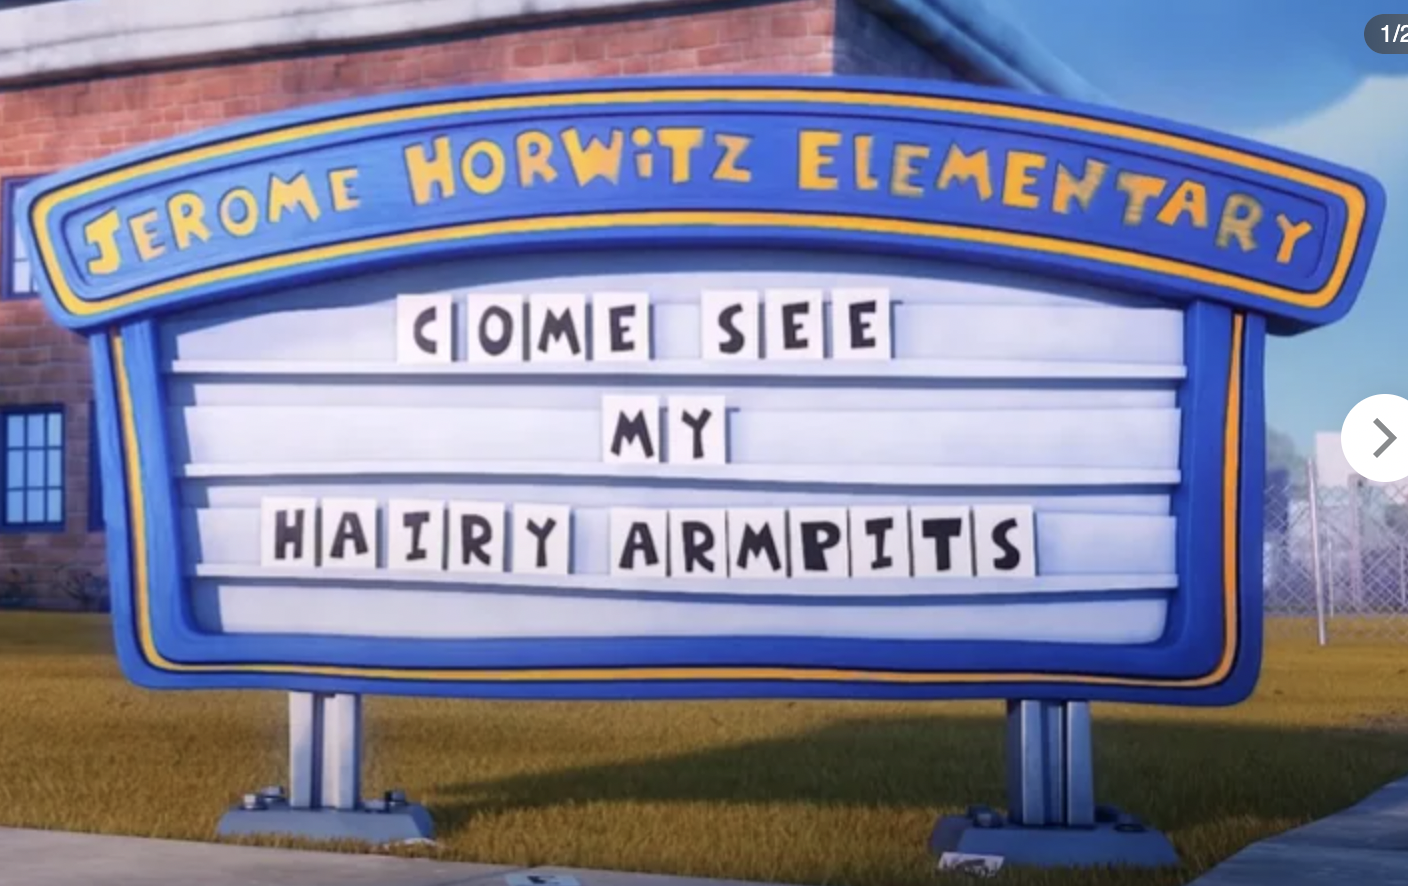 In “Captain Underpants: The First Epic Movie,” the elementary school is named after one of the Three Stooges Jerome Lester Horwitz, or by his nickname Curly Howard.